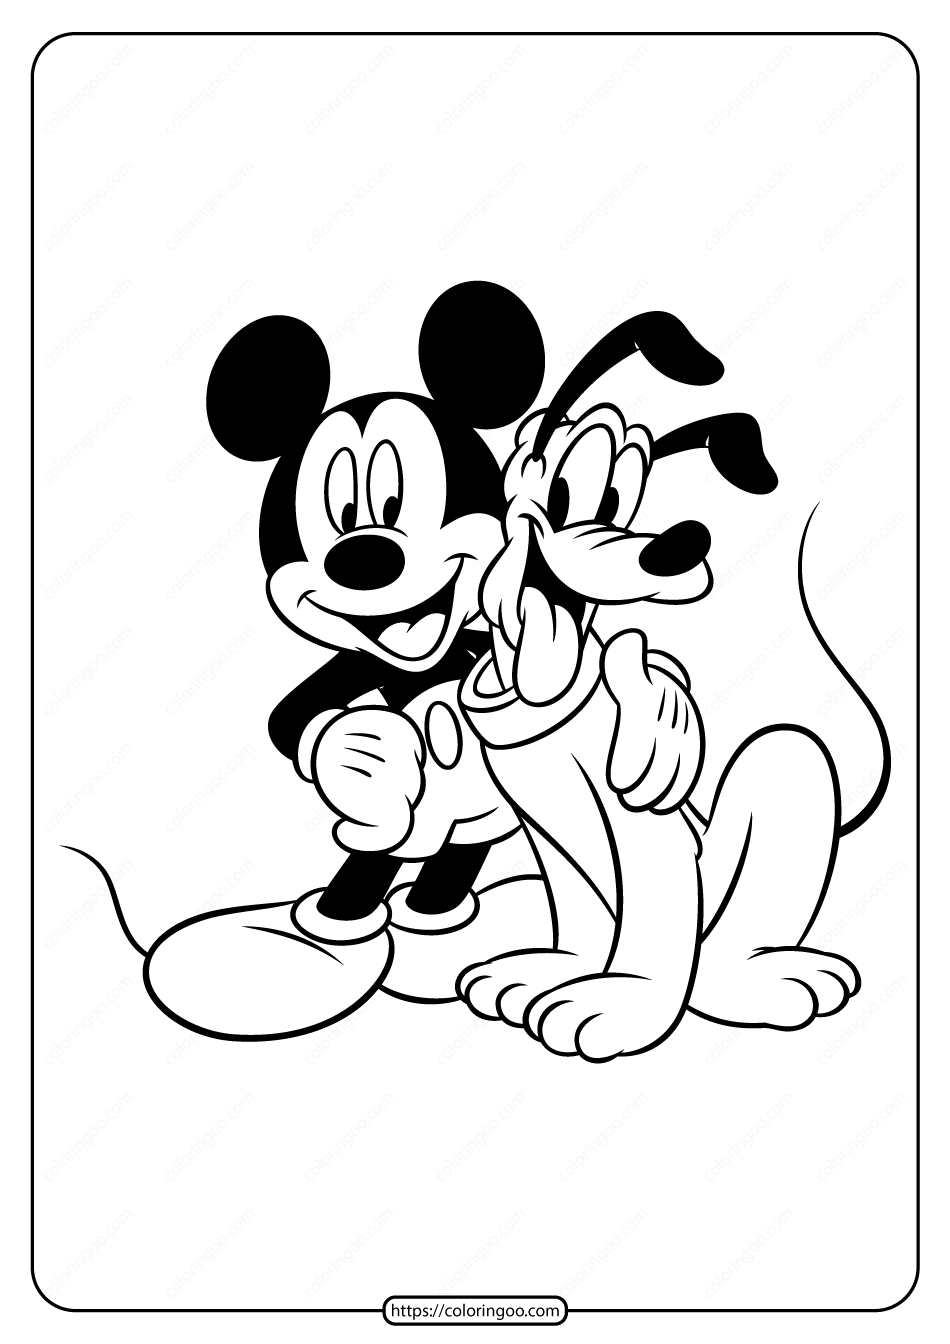 printable mickey mouse and his friend pluto coloring